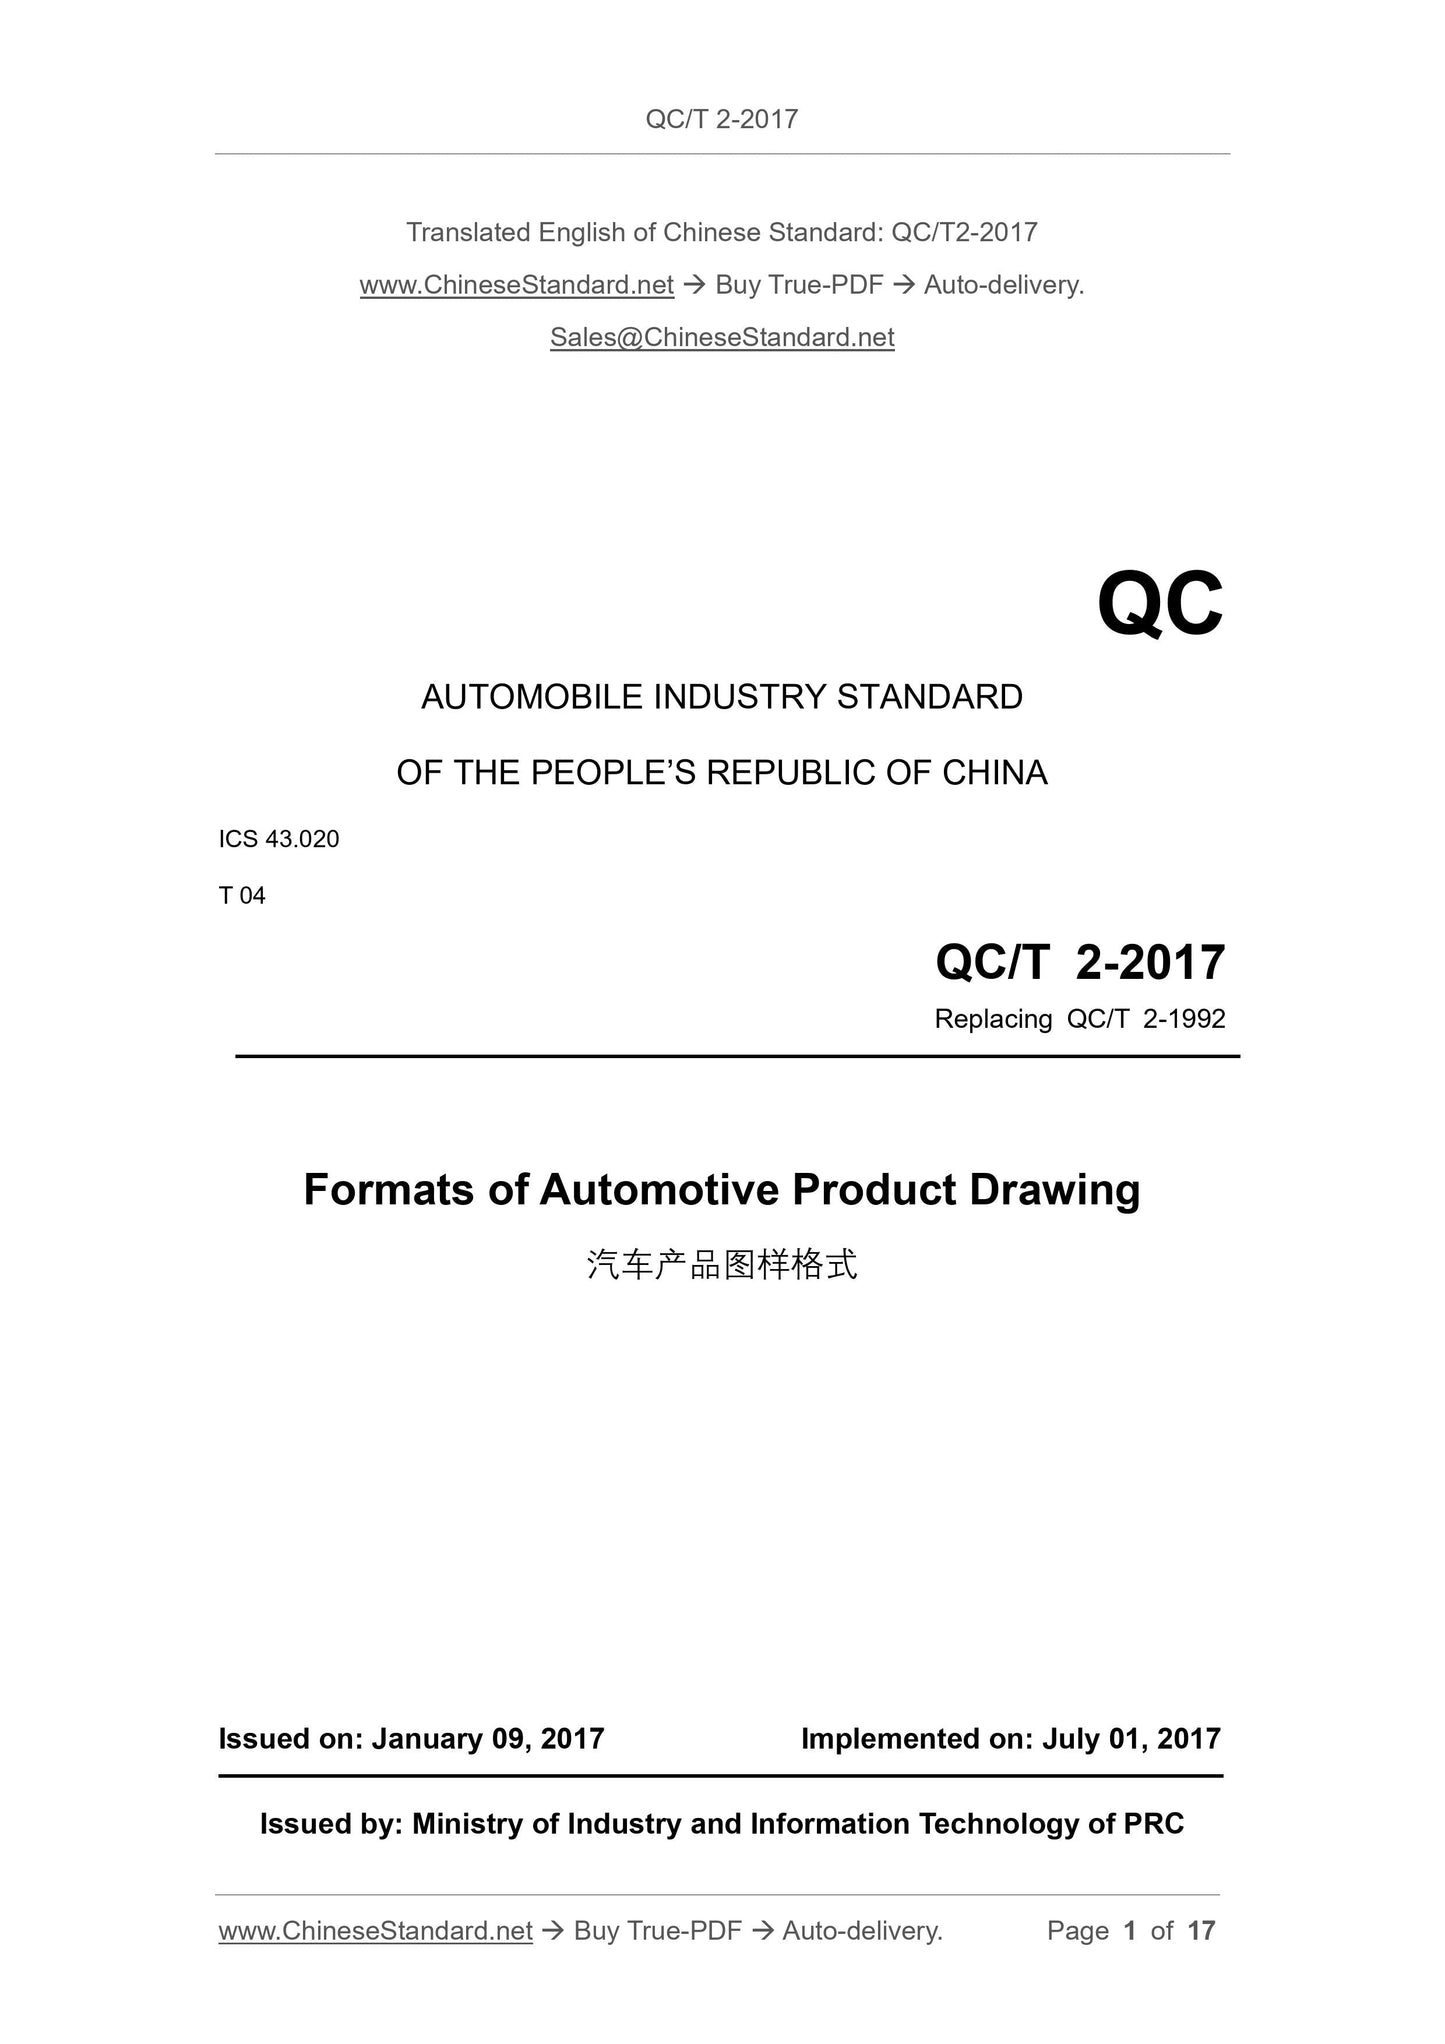 QC/T 2-2017 Page 1